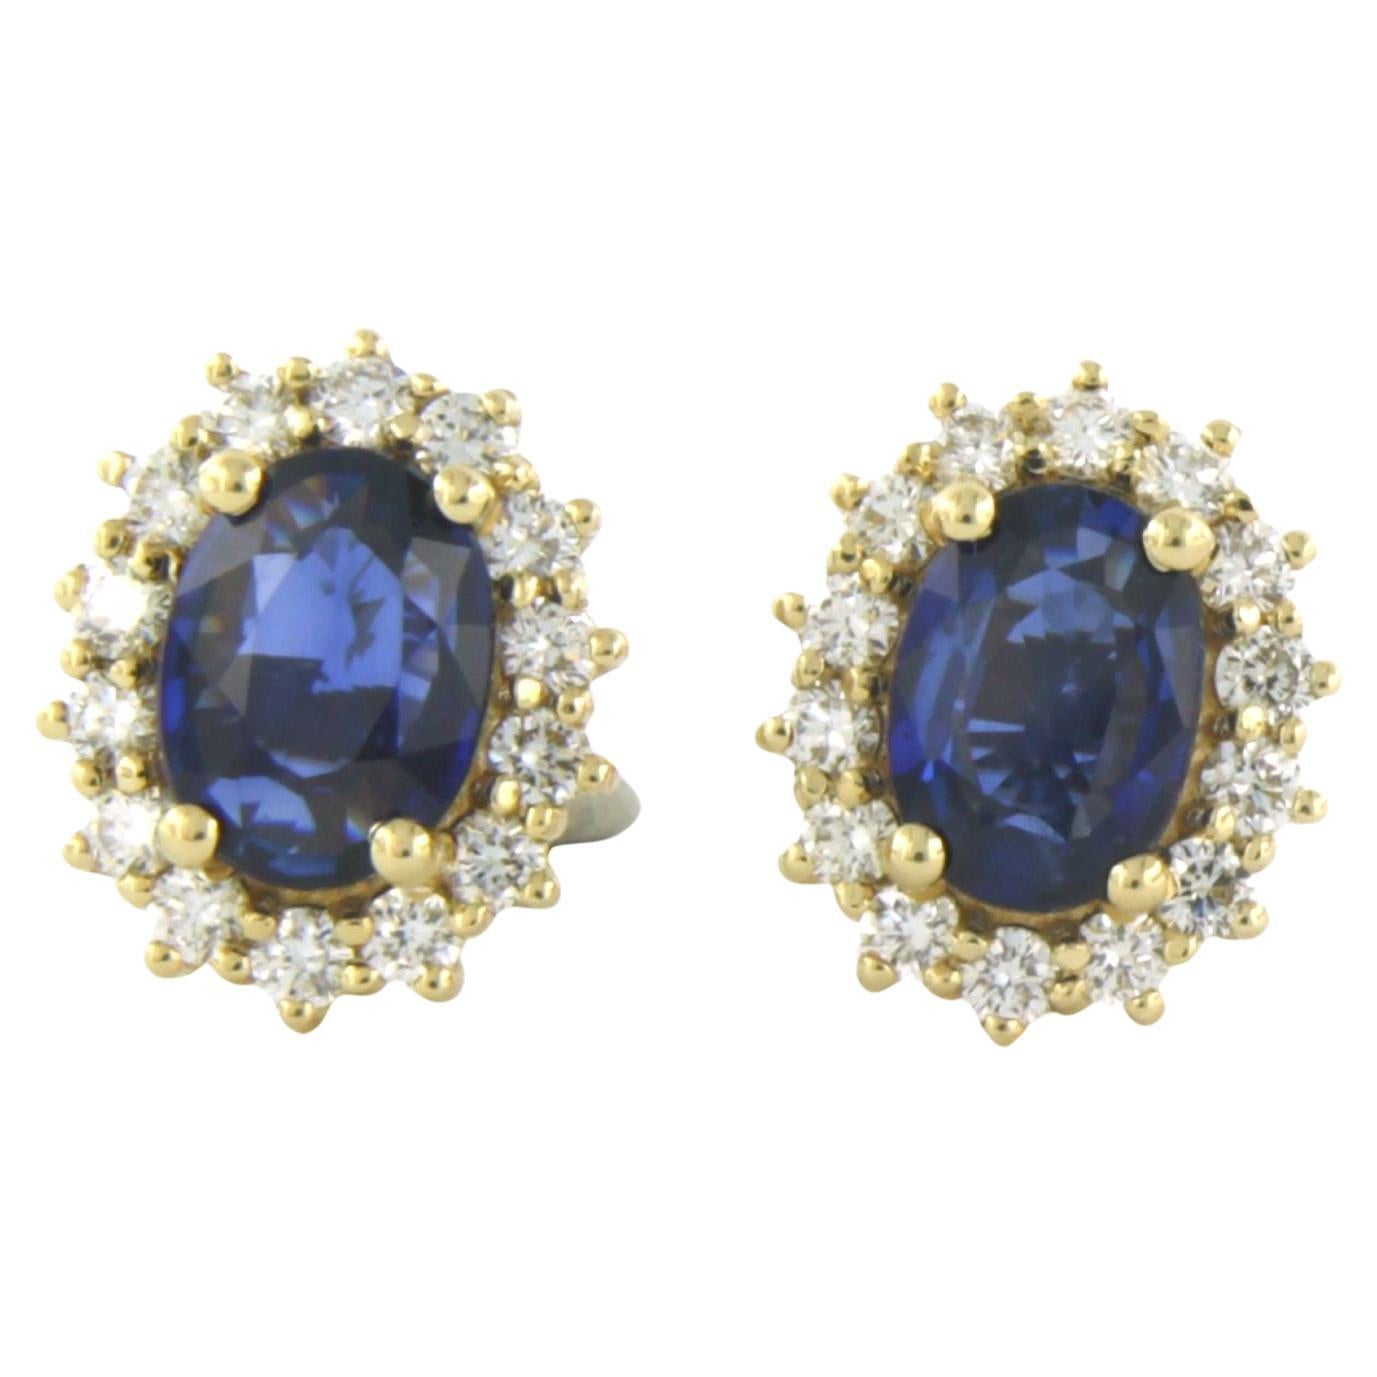 Earrings set with sapphire and diamonds 18k yellow gold